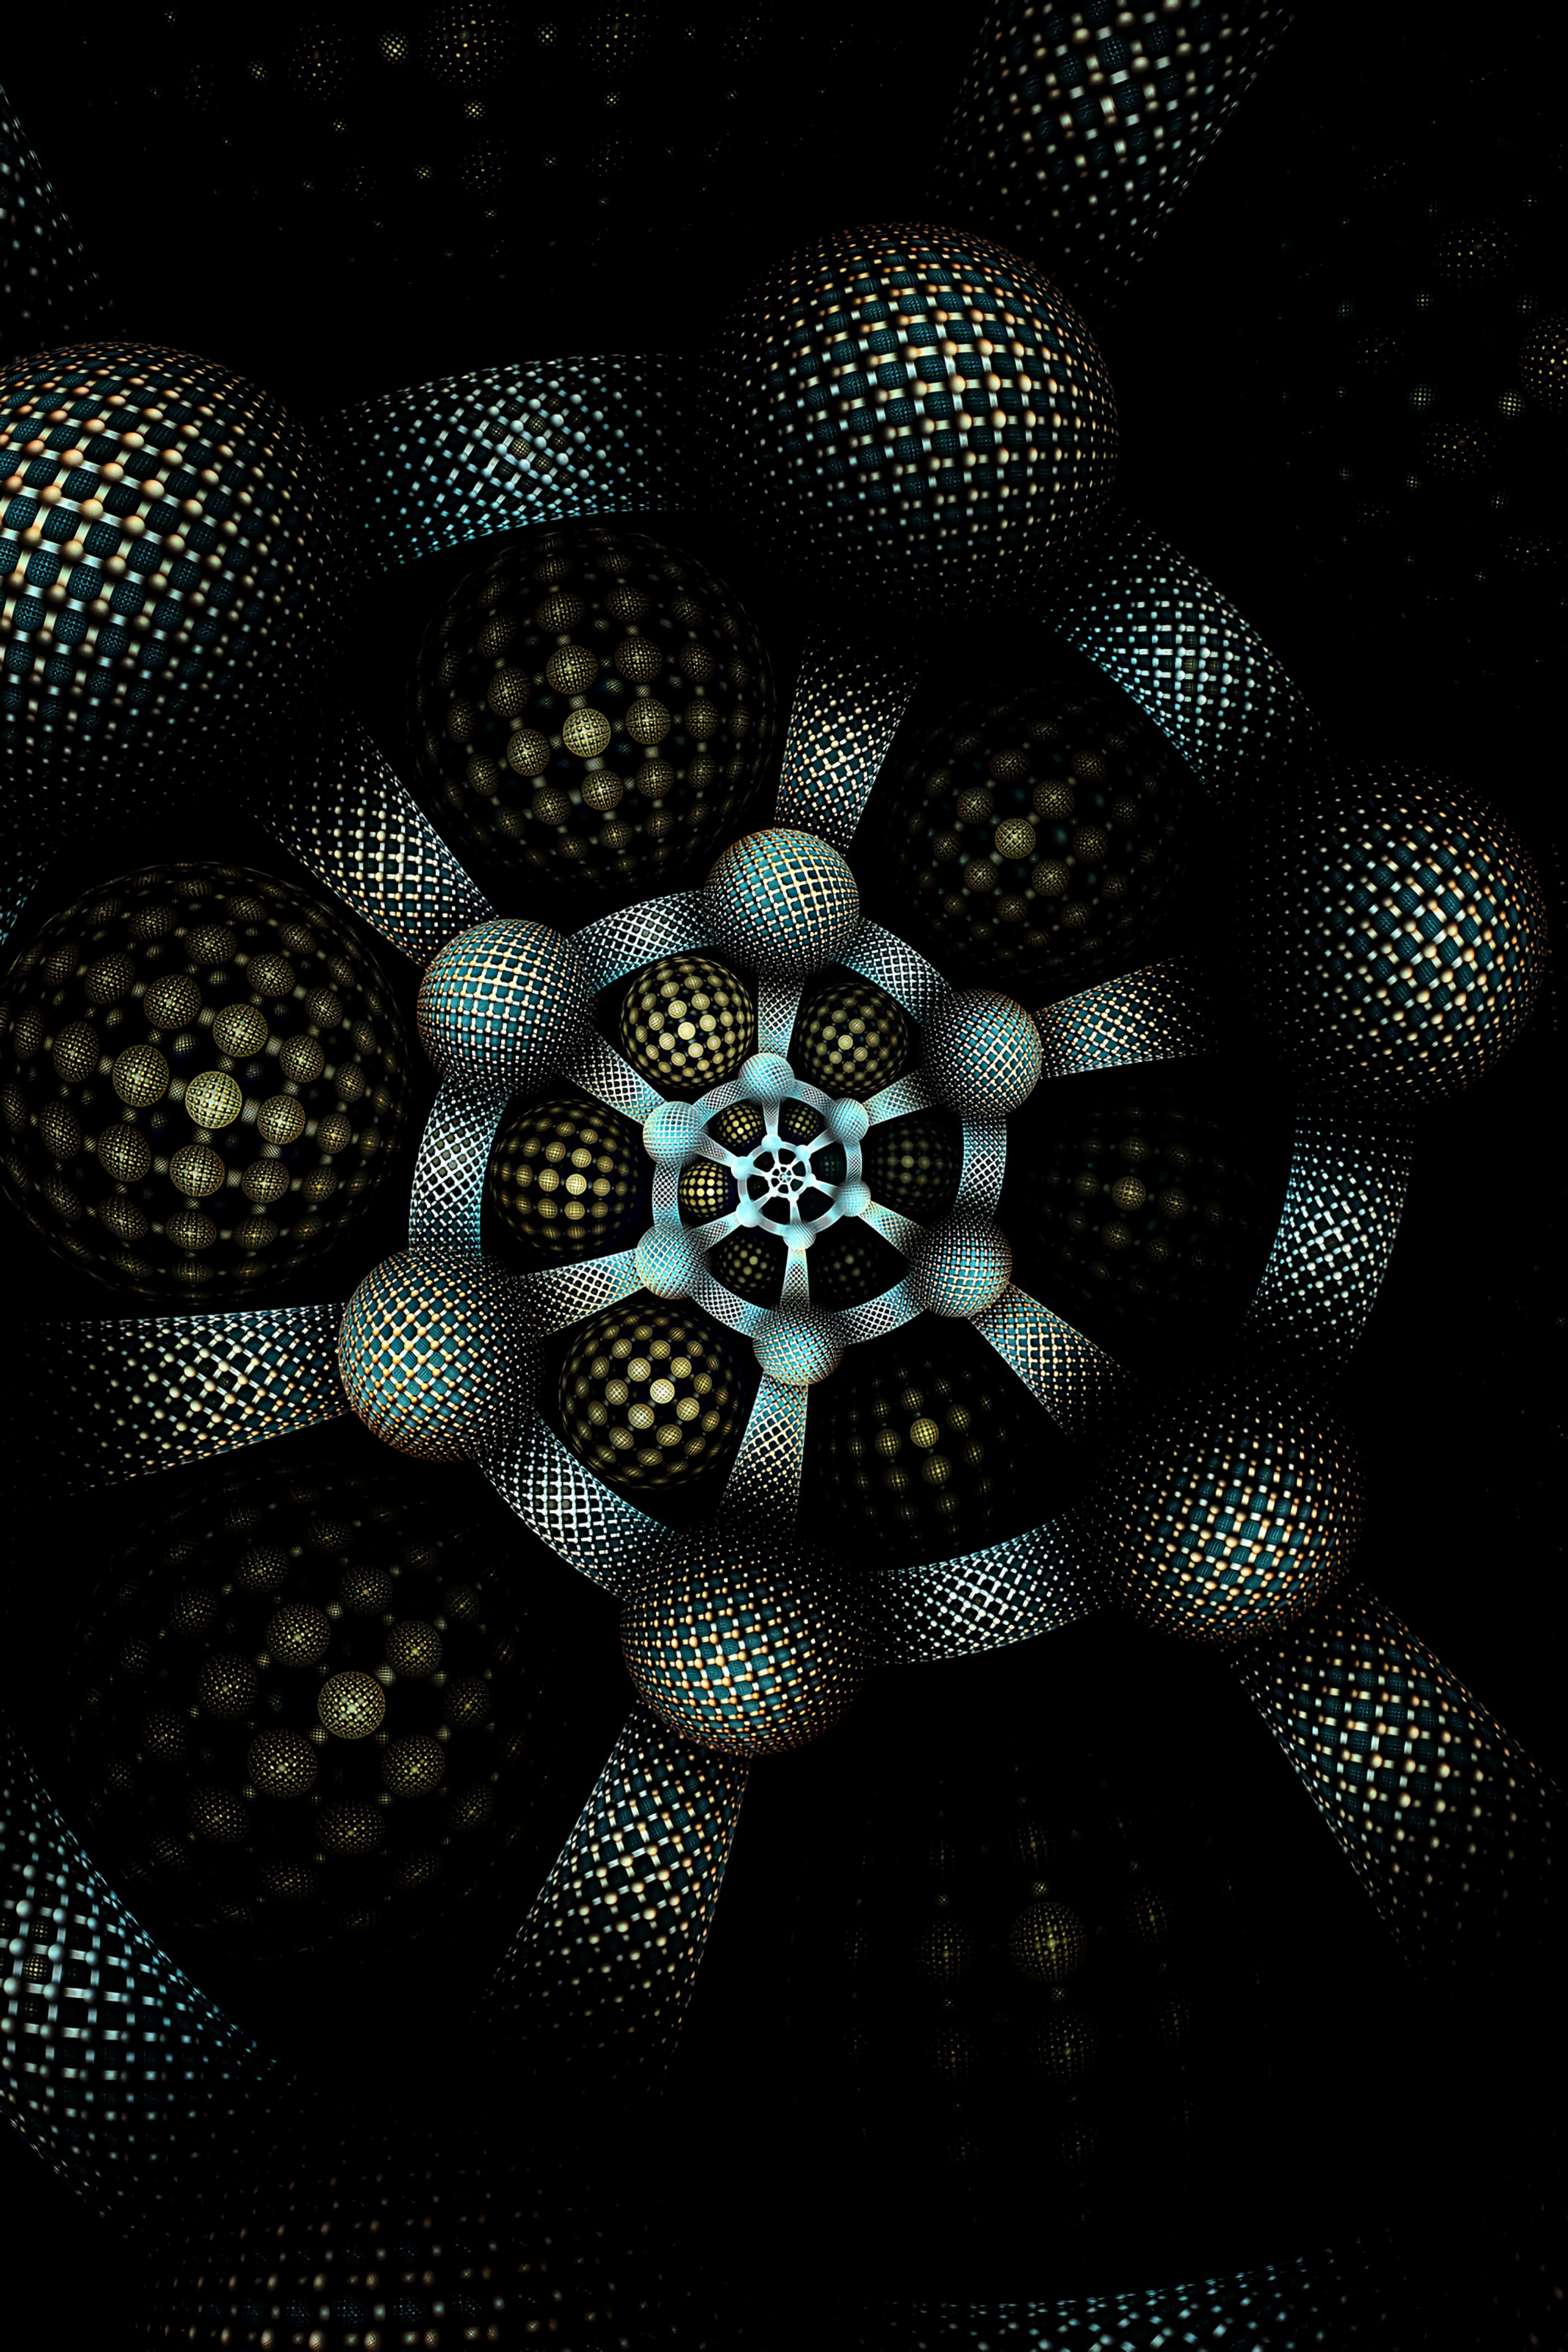 dark, form, circles, involute, abstract, pattern, fractal, swirling images